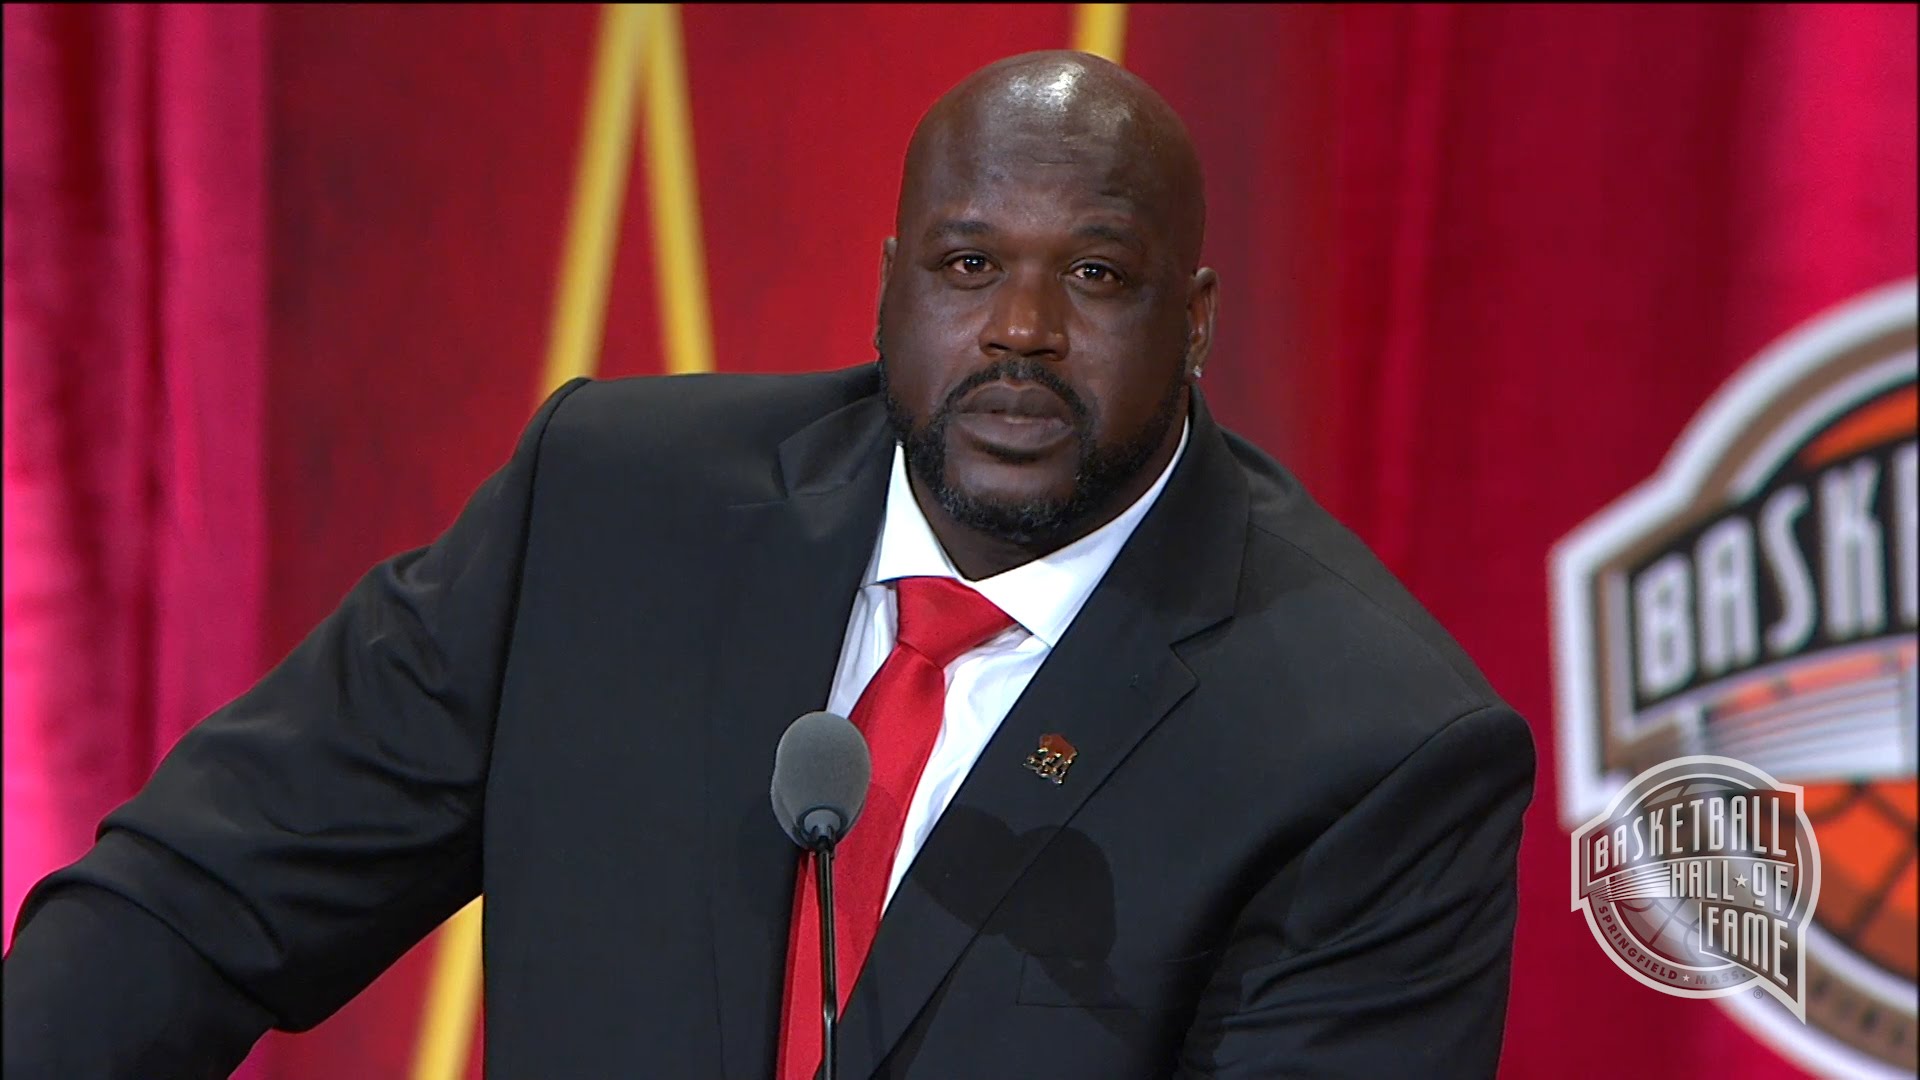 Shaquille O’Neal’s Basketball Hall of Fame Induction Speech